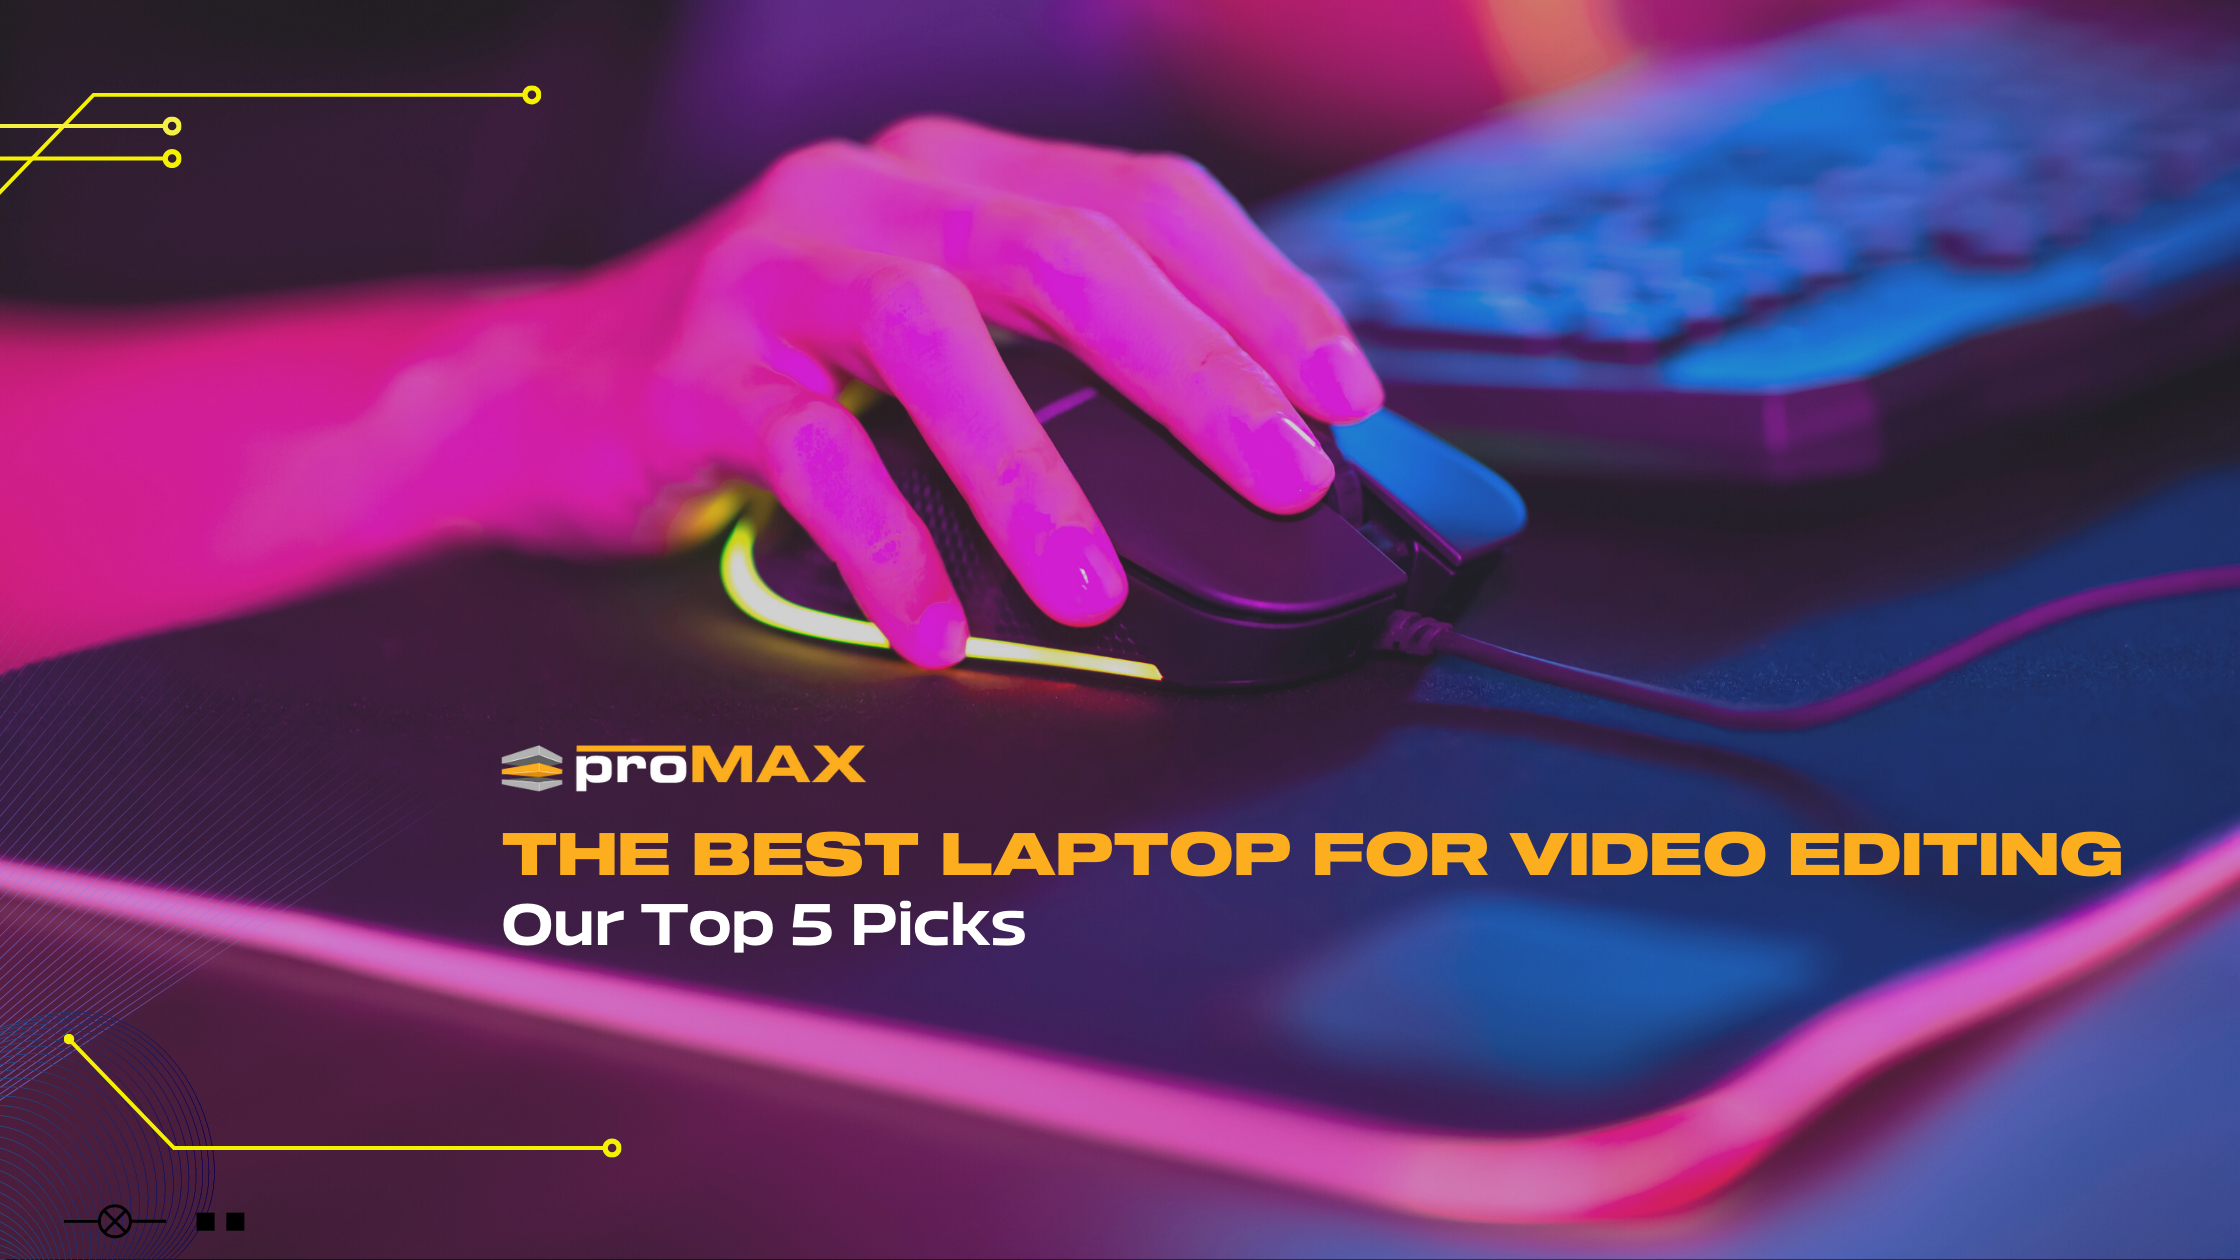 The Best Laptop for Video Editing in 2022: Our Top 5 Picks